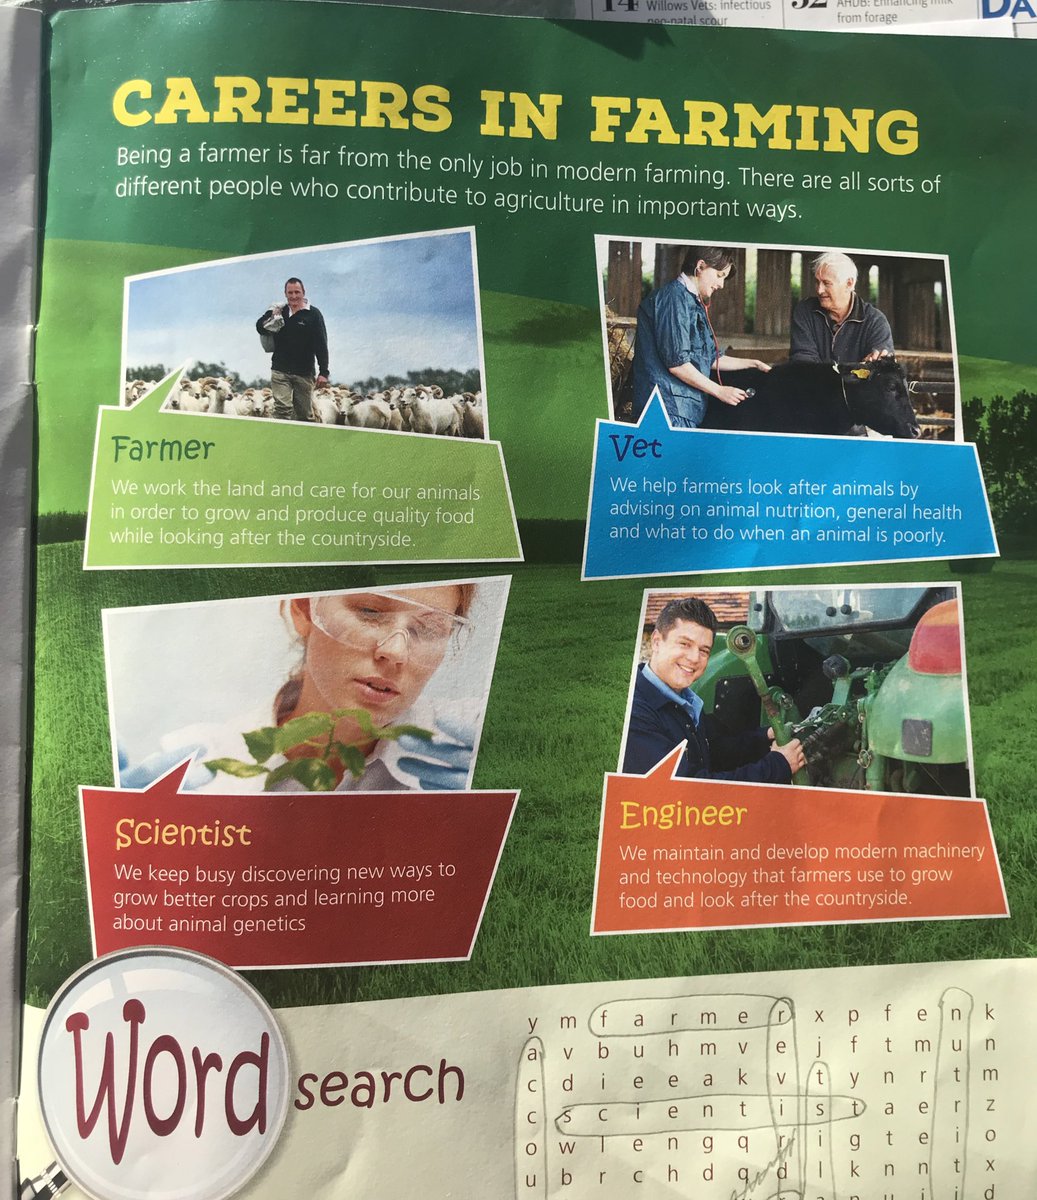 My daughter brought this back from school. Great to see the farming sector being promoted in schools by the NFU @NFUtweets but shame they decide to make Black and Brown children feel they are not included in our sector and so are not inspired to join. Representation matters. 🤦🏾‍♂️